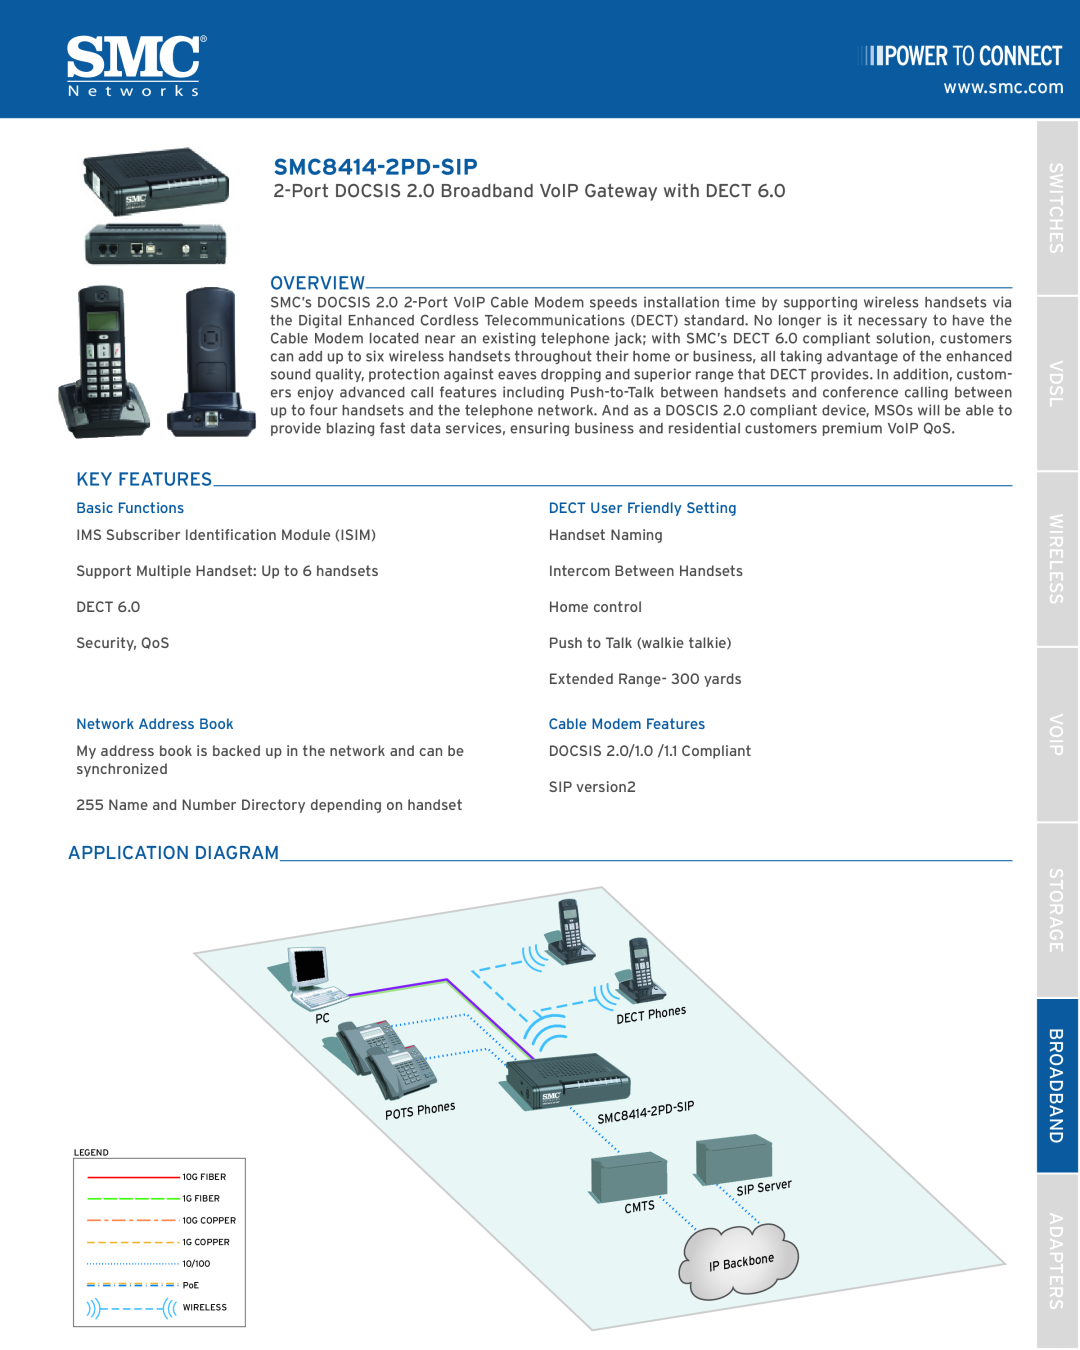 SMC Networks SMC8414-2PD-SIP manual Overview, Key Features, Application Diagram, Switches Vdsl Wireless Voip 